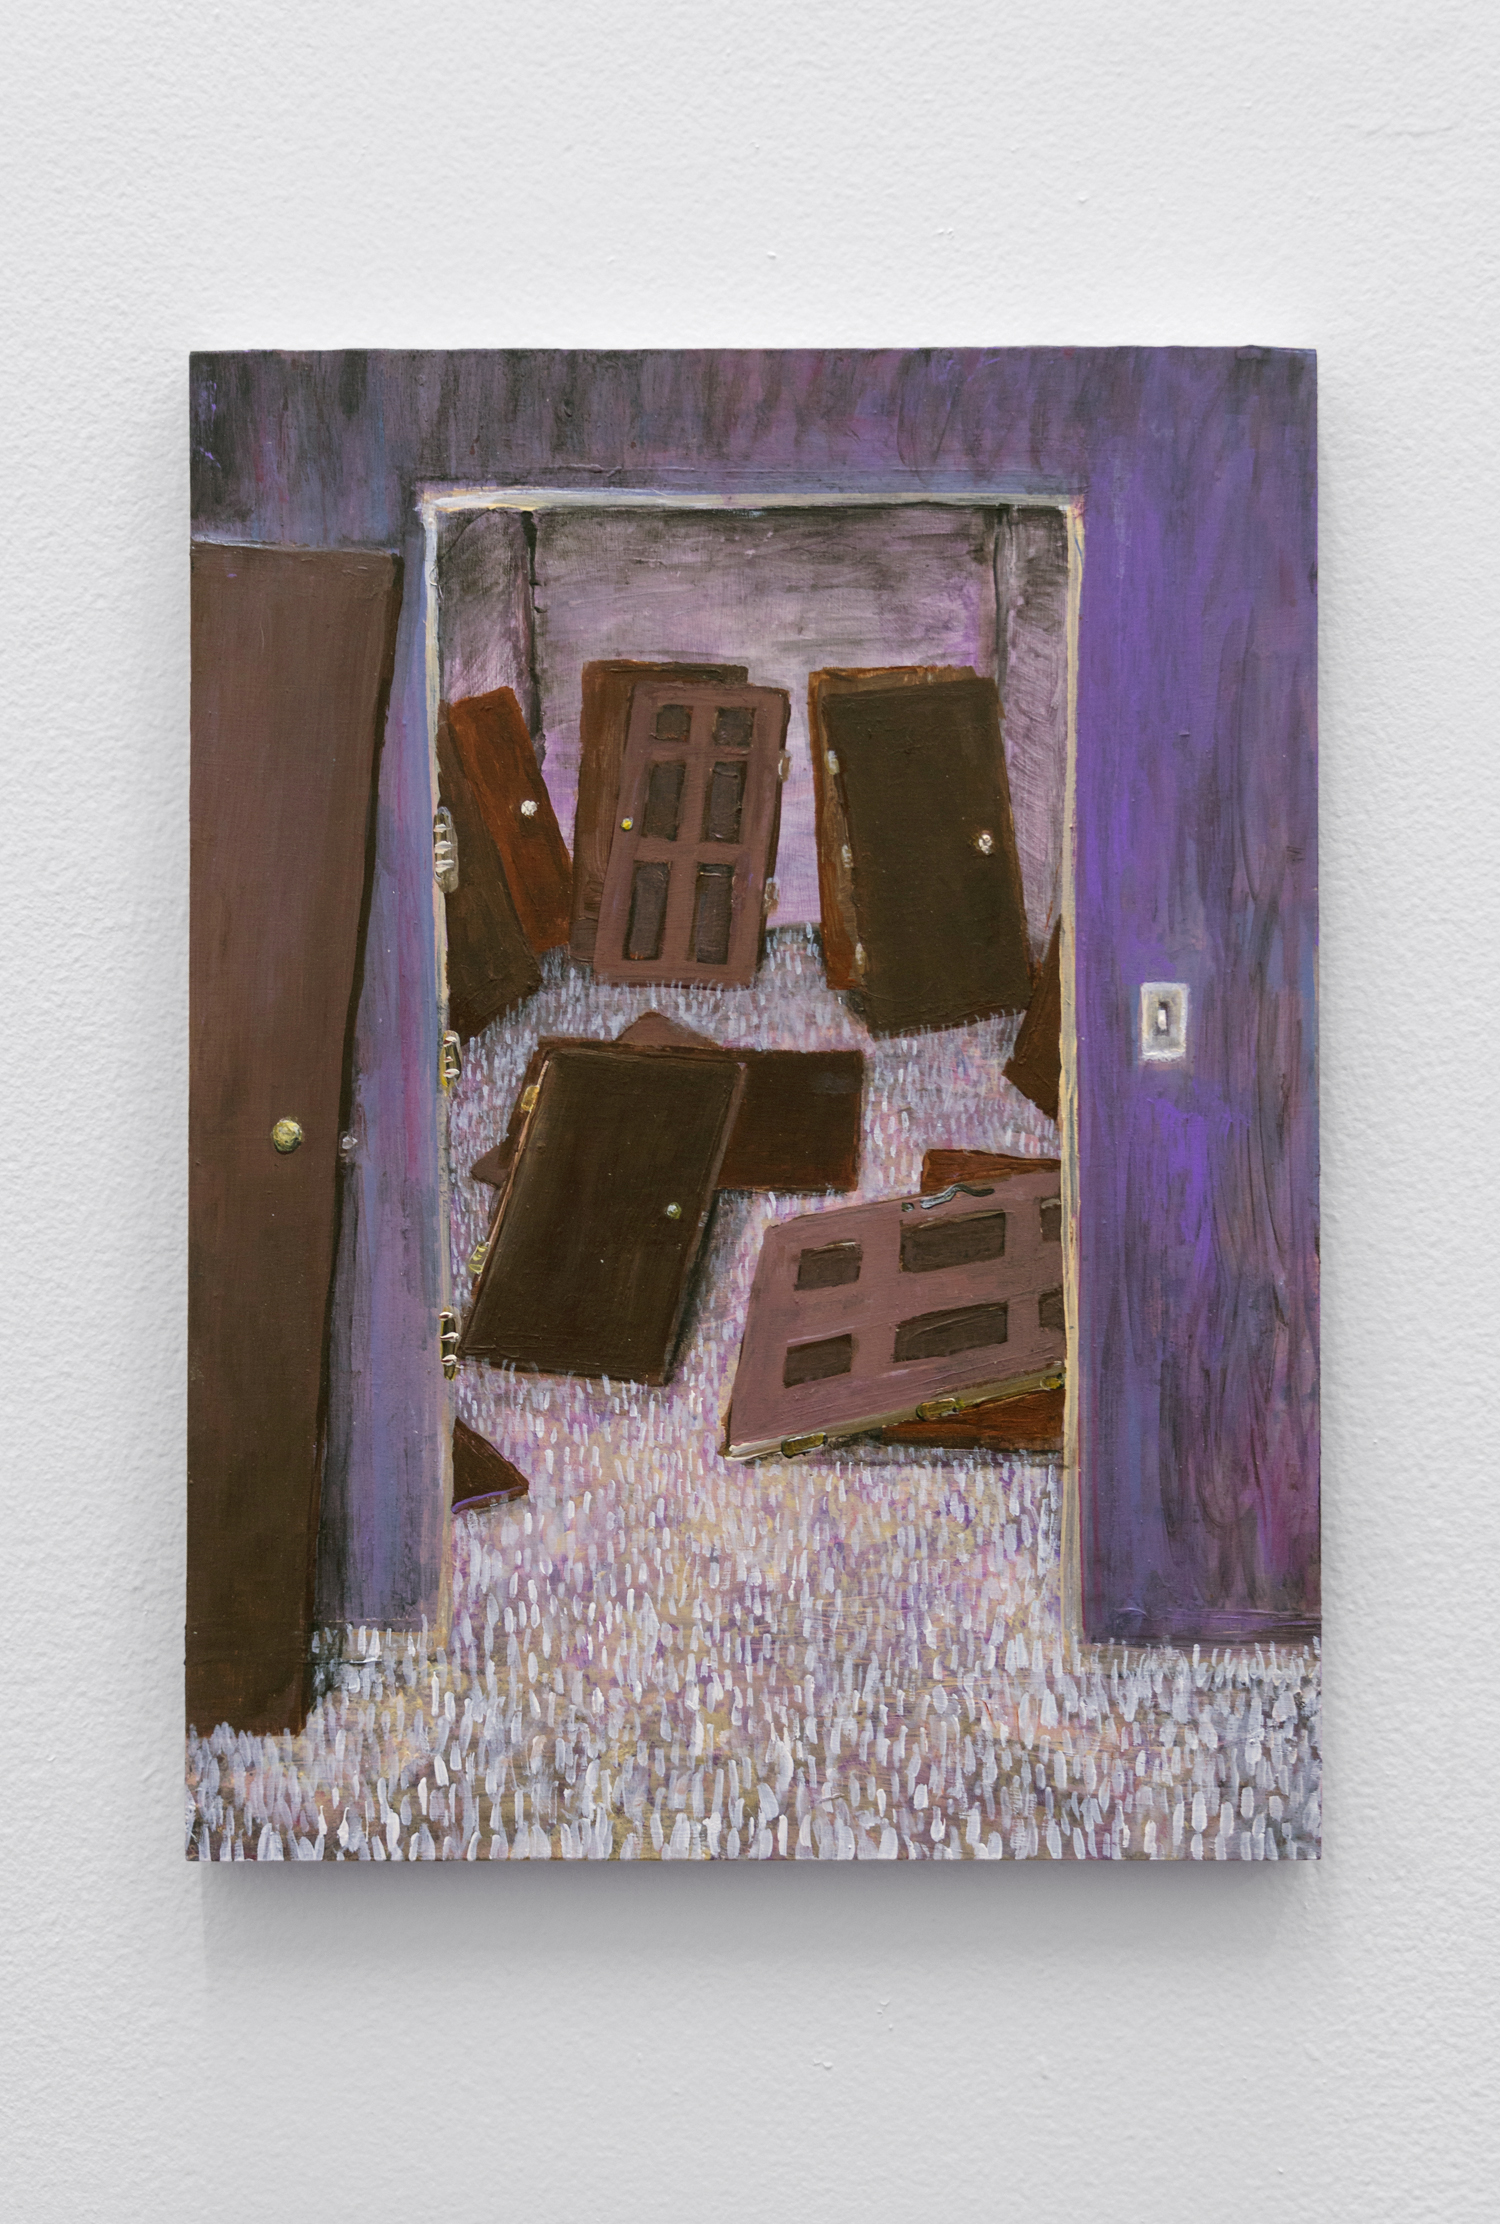   Doors , Acrylic and flashe on cradled birch panel 14 x 11 in, 2019 